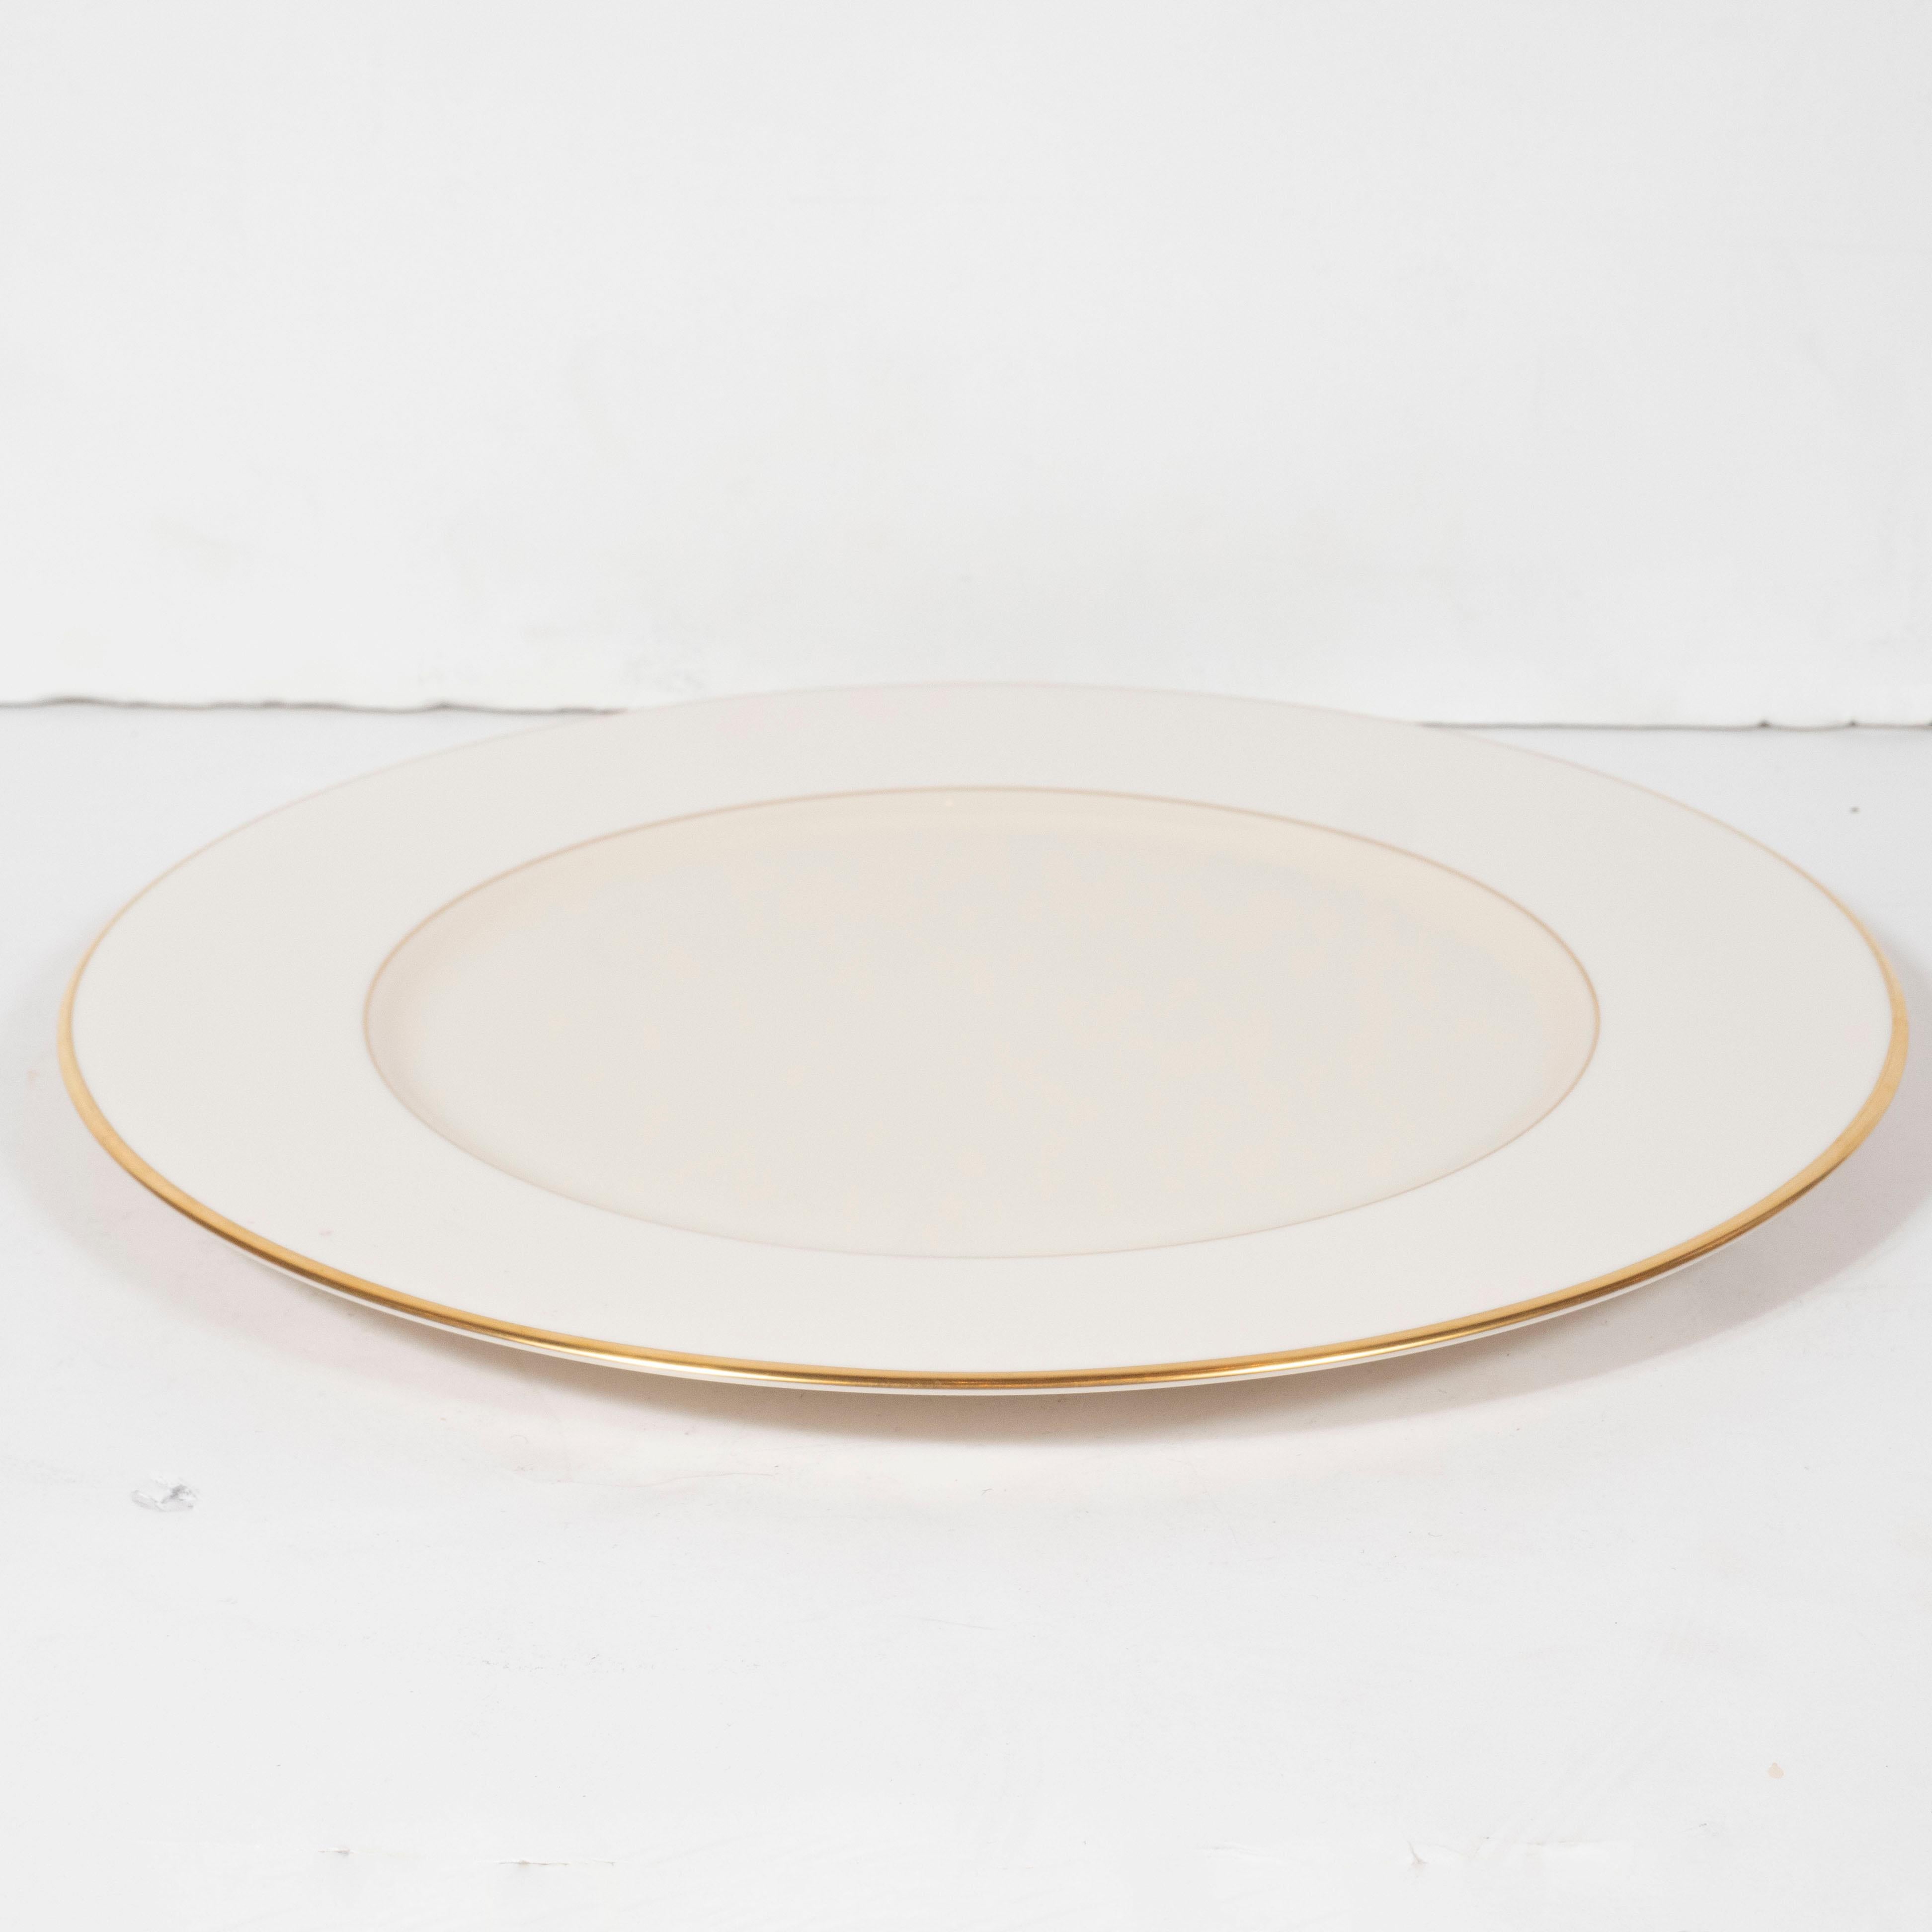 This elegant set of six charger plates were realized by the esteemed maker Lenox in the United States. They feature 24-karat gold banding in the center, as well as along the outer perimeter on a bone china background. With their clean modernist